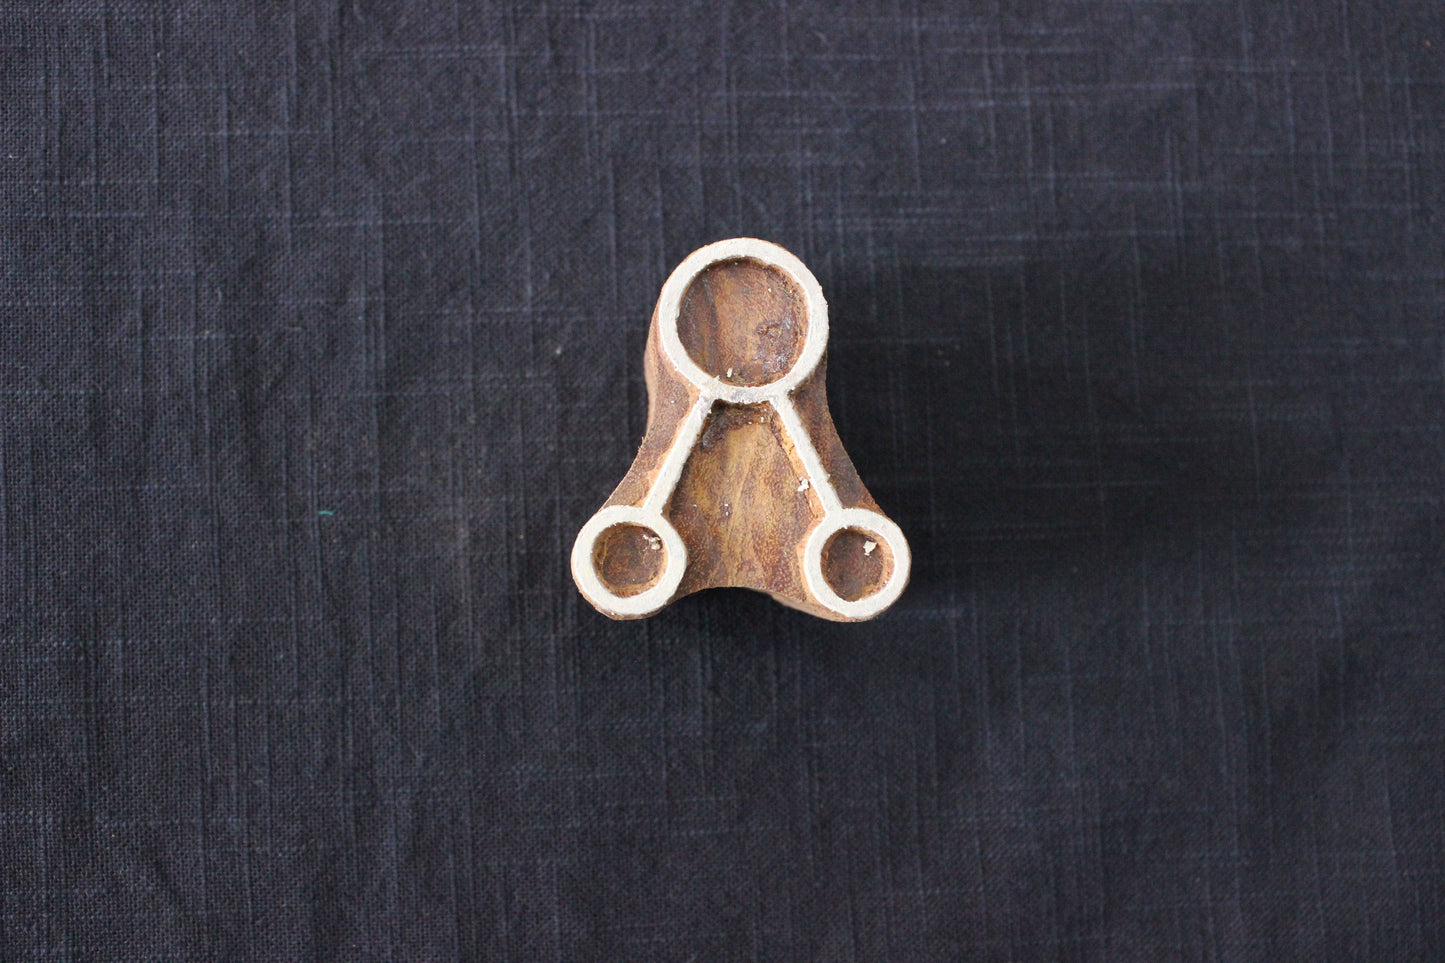 Shape Stamp Hand Carved Wood Block Stamp Space Stamp Indian Wooden Stamp For Printing Hand Carved Soap Making Stamp Traditional Wooden Printing Block